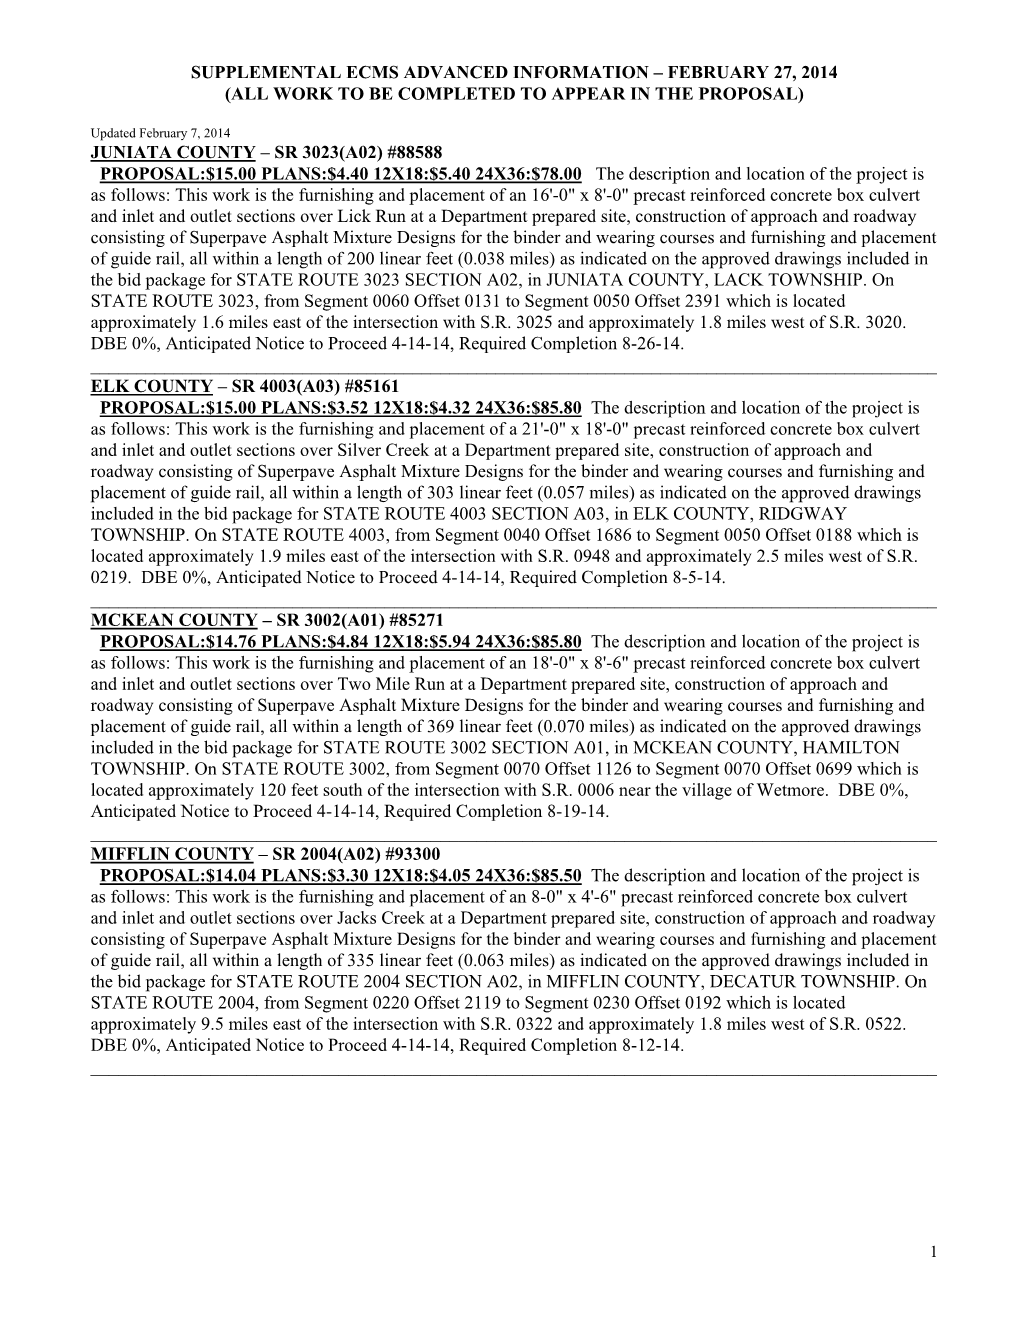 Supplemental Ecms Advanced Information – February 27, 2014 (All Work to Be Completed to Appear in the Proposal)